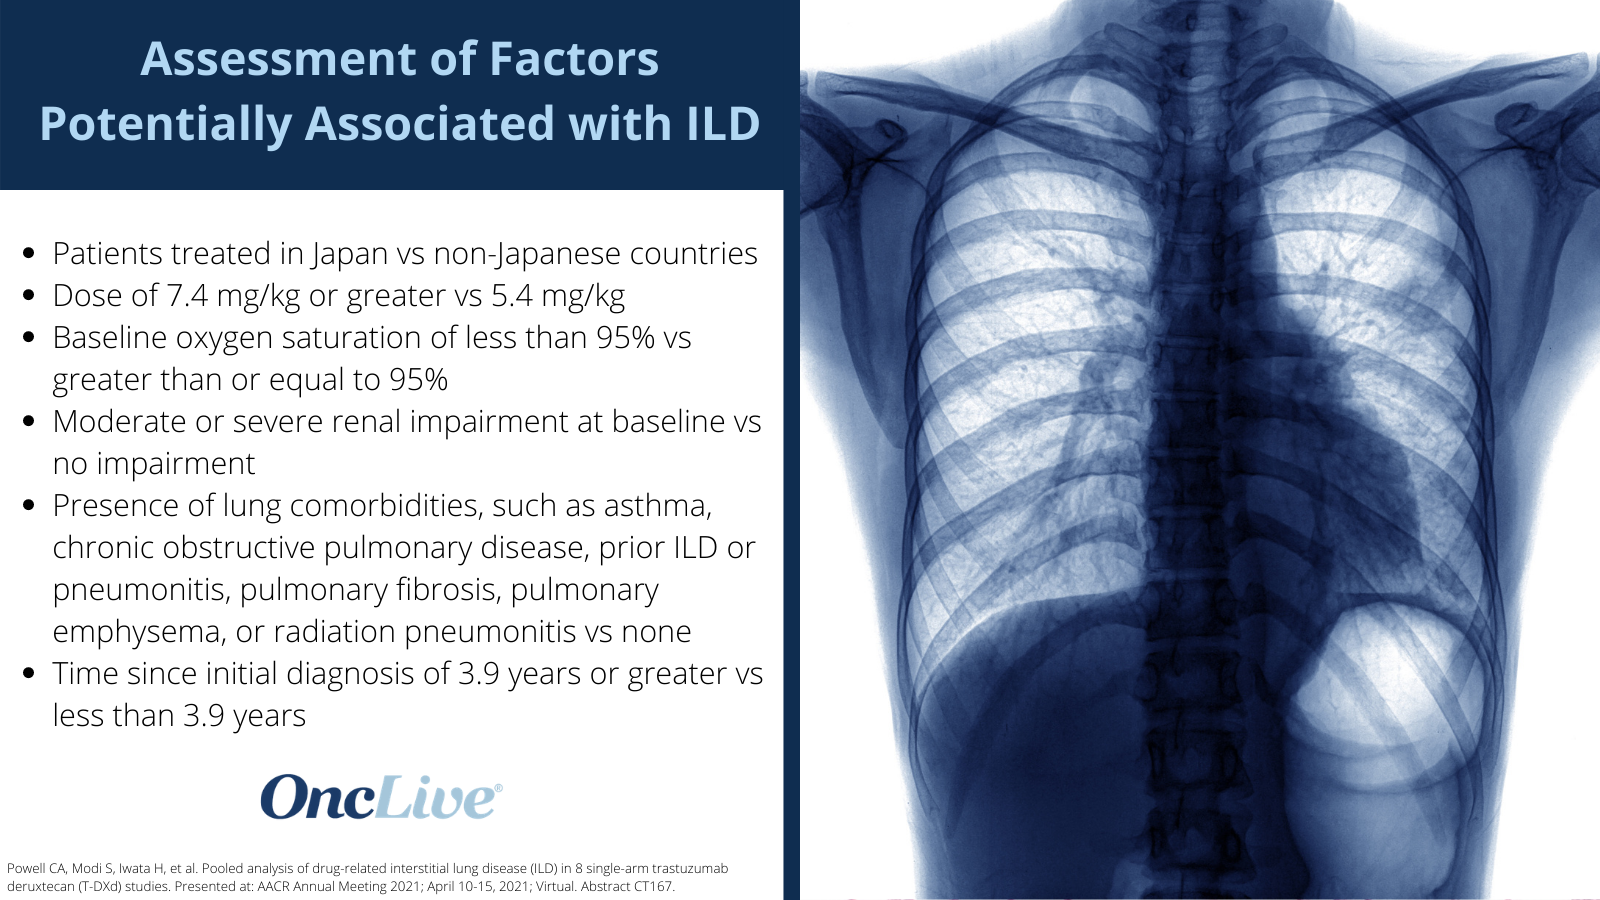 Assessment of factors potentially associated with ILD